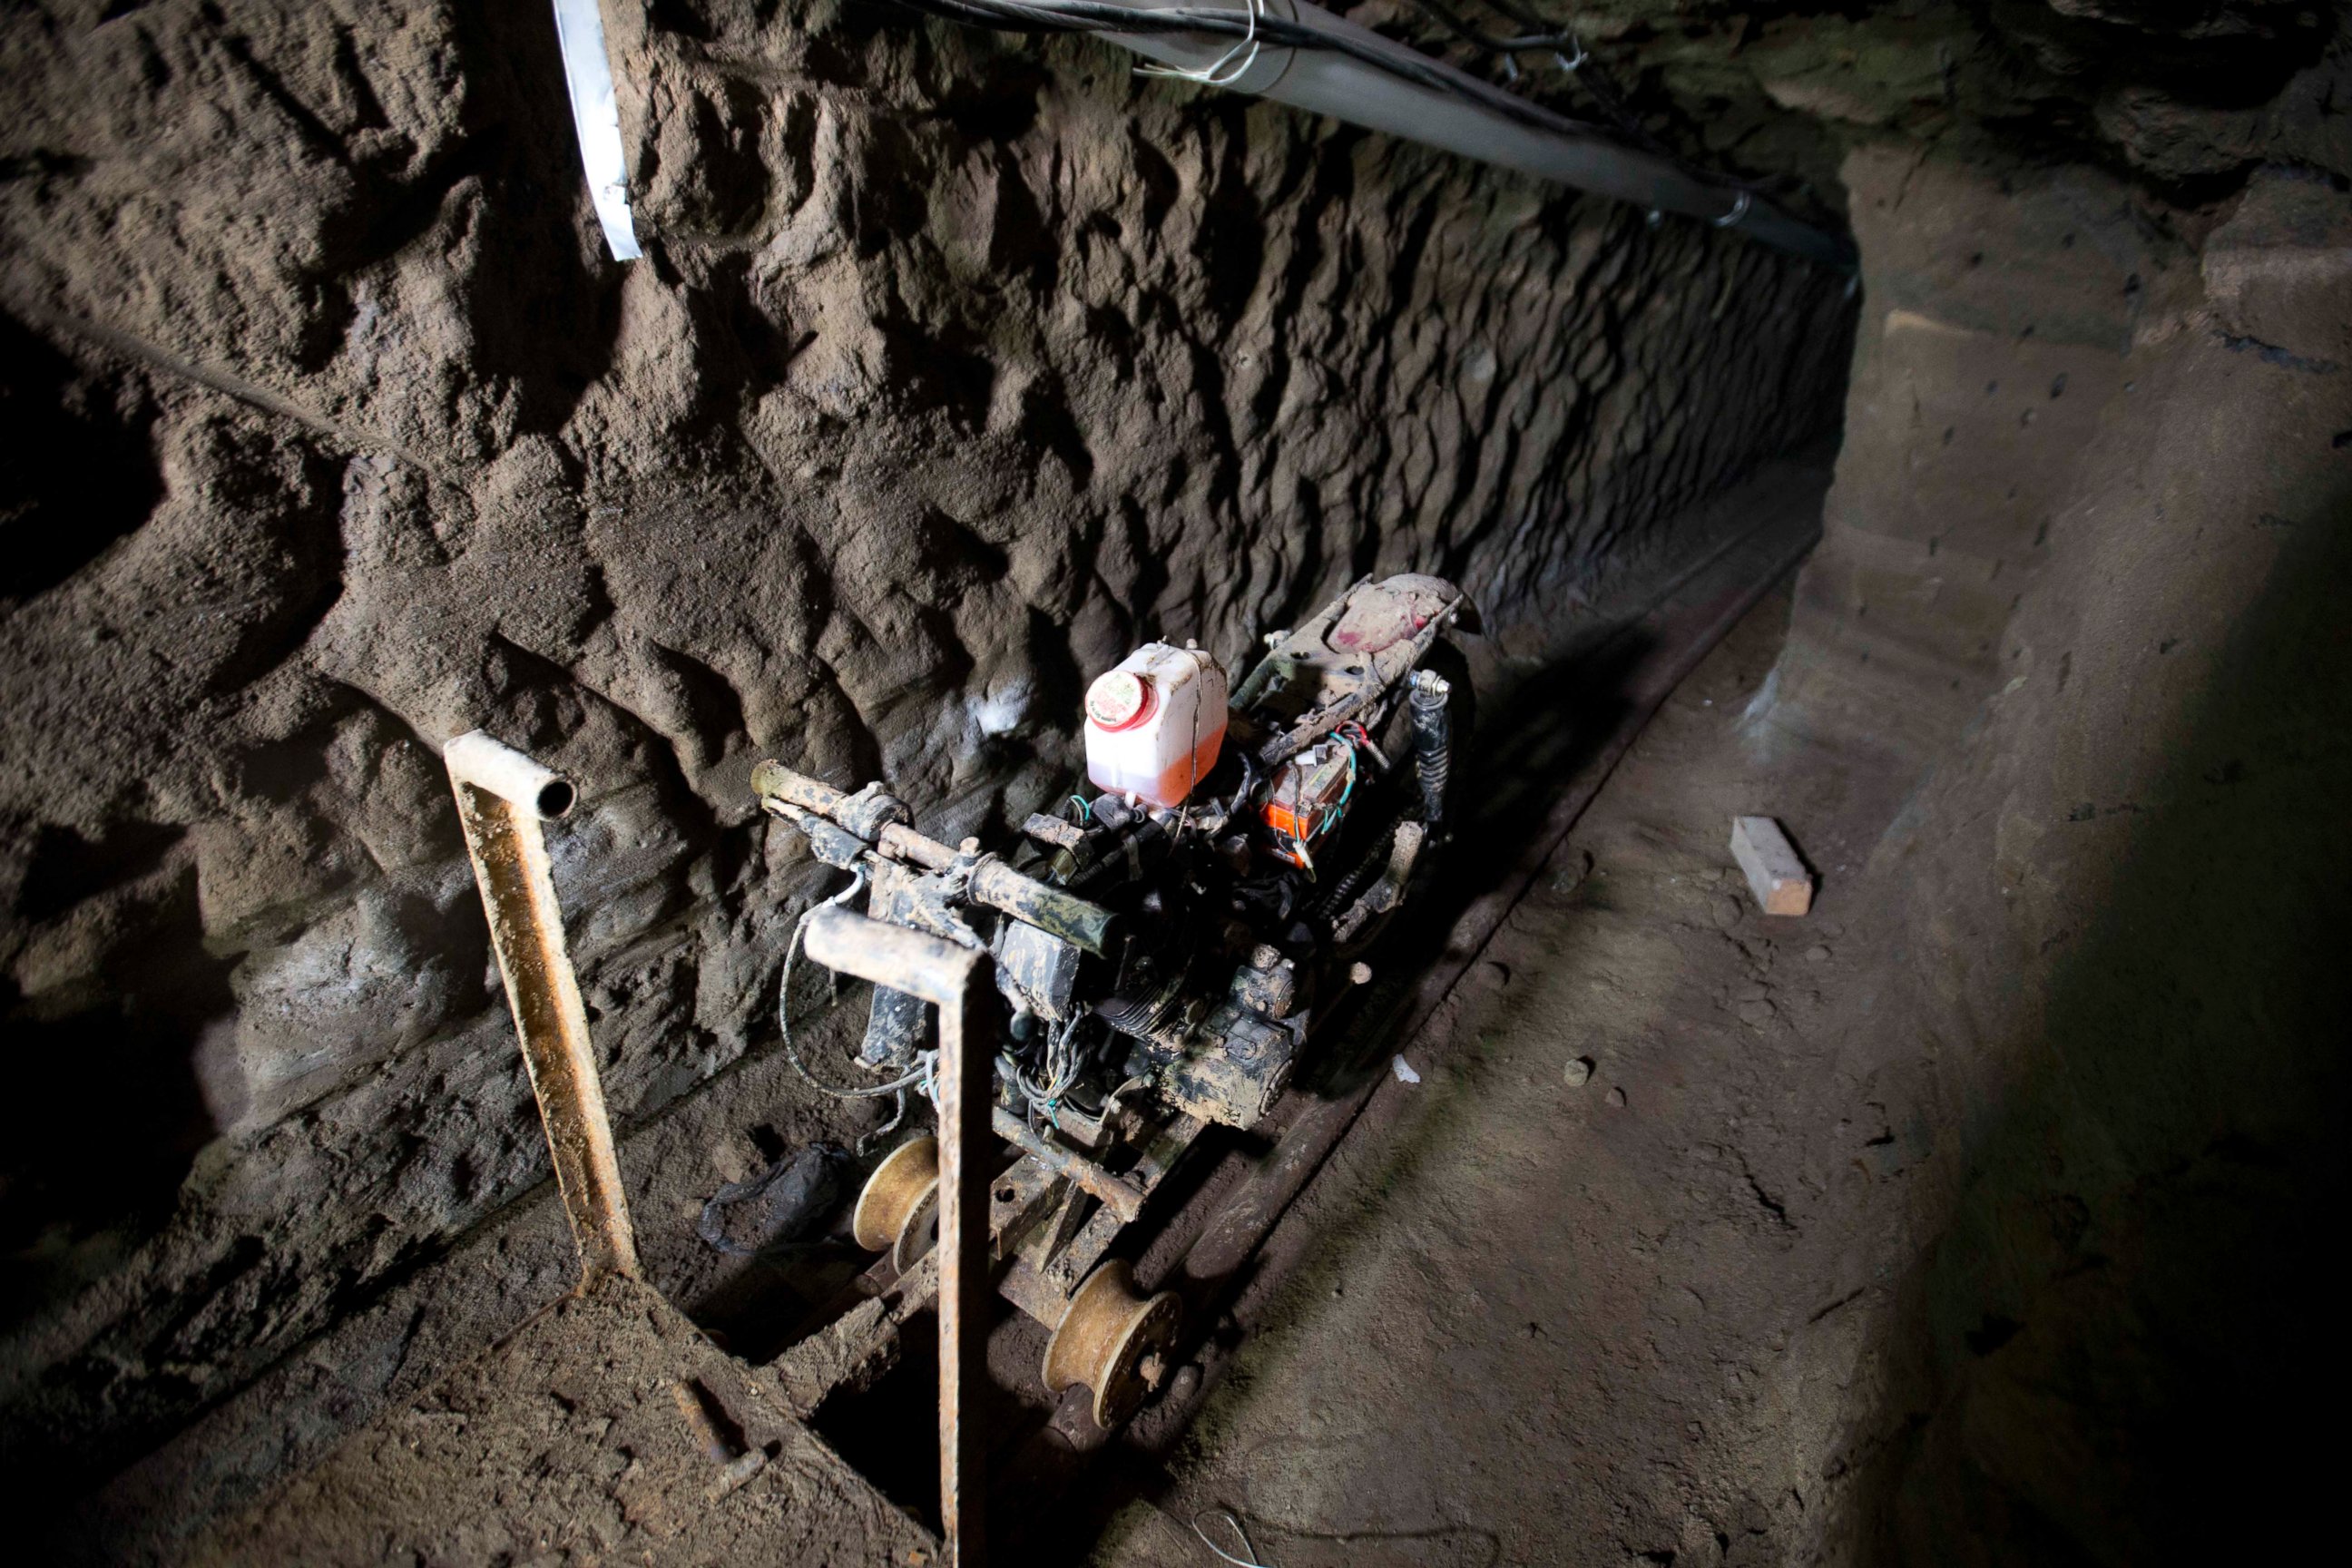 PHOTO: A motorcycle adapted to a rail sits in the tunnel under the half-built house where according to authorities, drug lord Joaquin "El Chapo" Guzman made his escape from the Altiplano maximum security prison in Almoloya, Mexico, July 14, 2015.